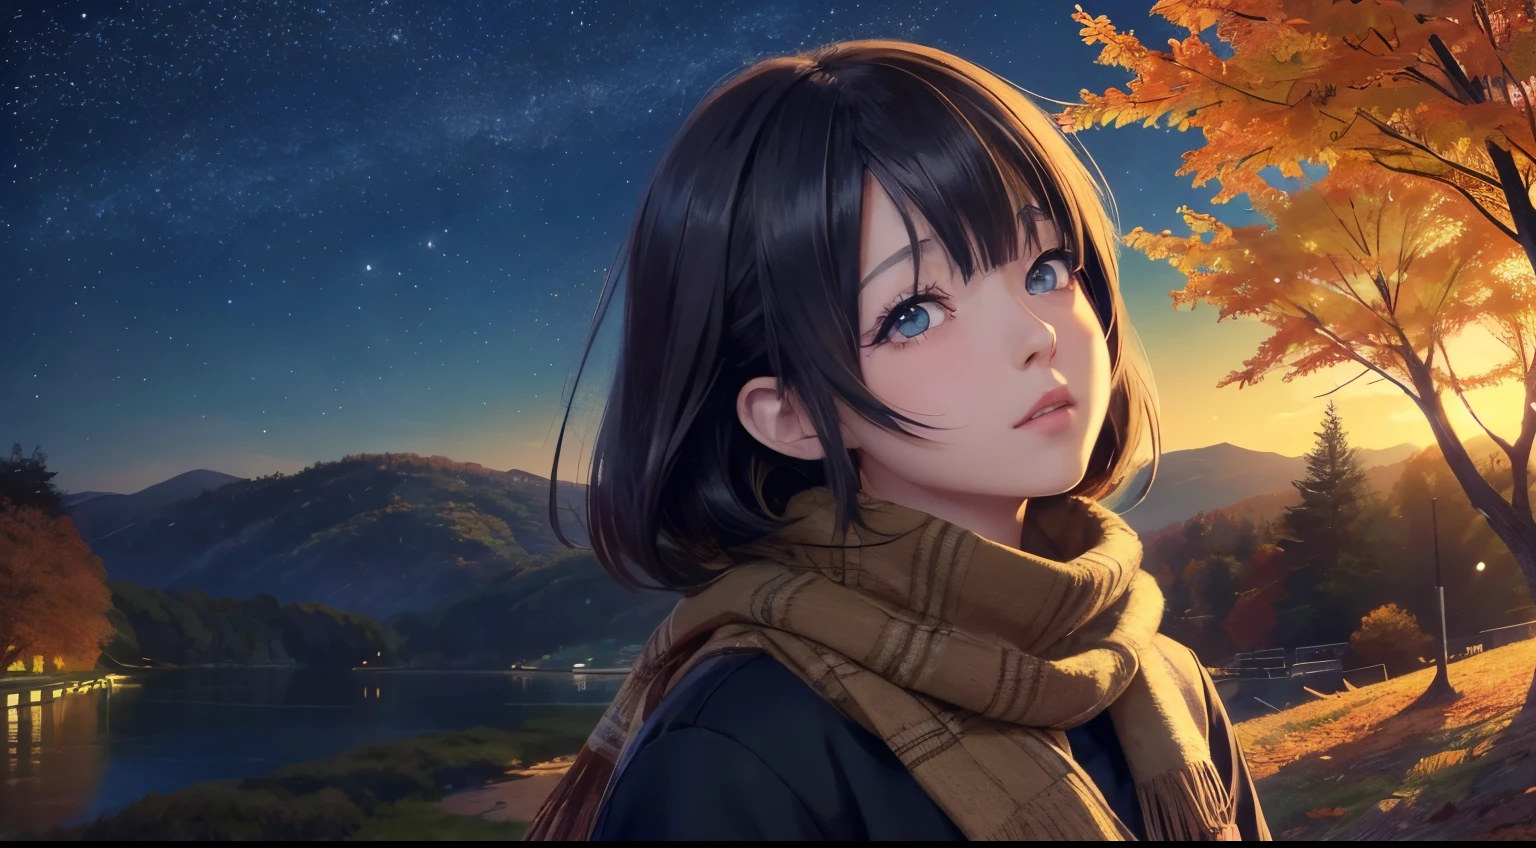 Anime girl looking up at the sky wearing a scarf, 🍂 , 🍁 , night scene，Realistic cute girl painting, Anime visuals of a cute girl, Ilya Kuvshinov landscape, realistic anime 3D style, anime realism style, style of anime. 8K, High quality anime art style, (Anime manga girl), Anime Pictures, Realistic anime art style